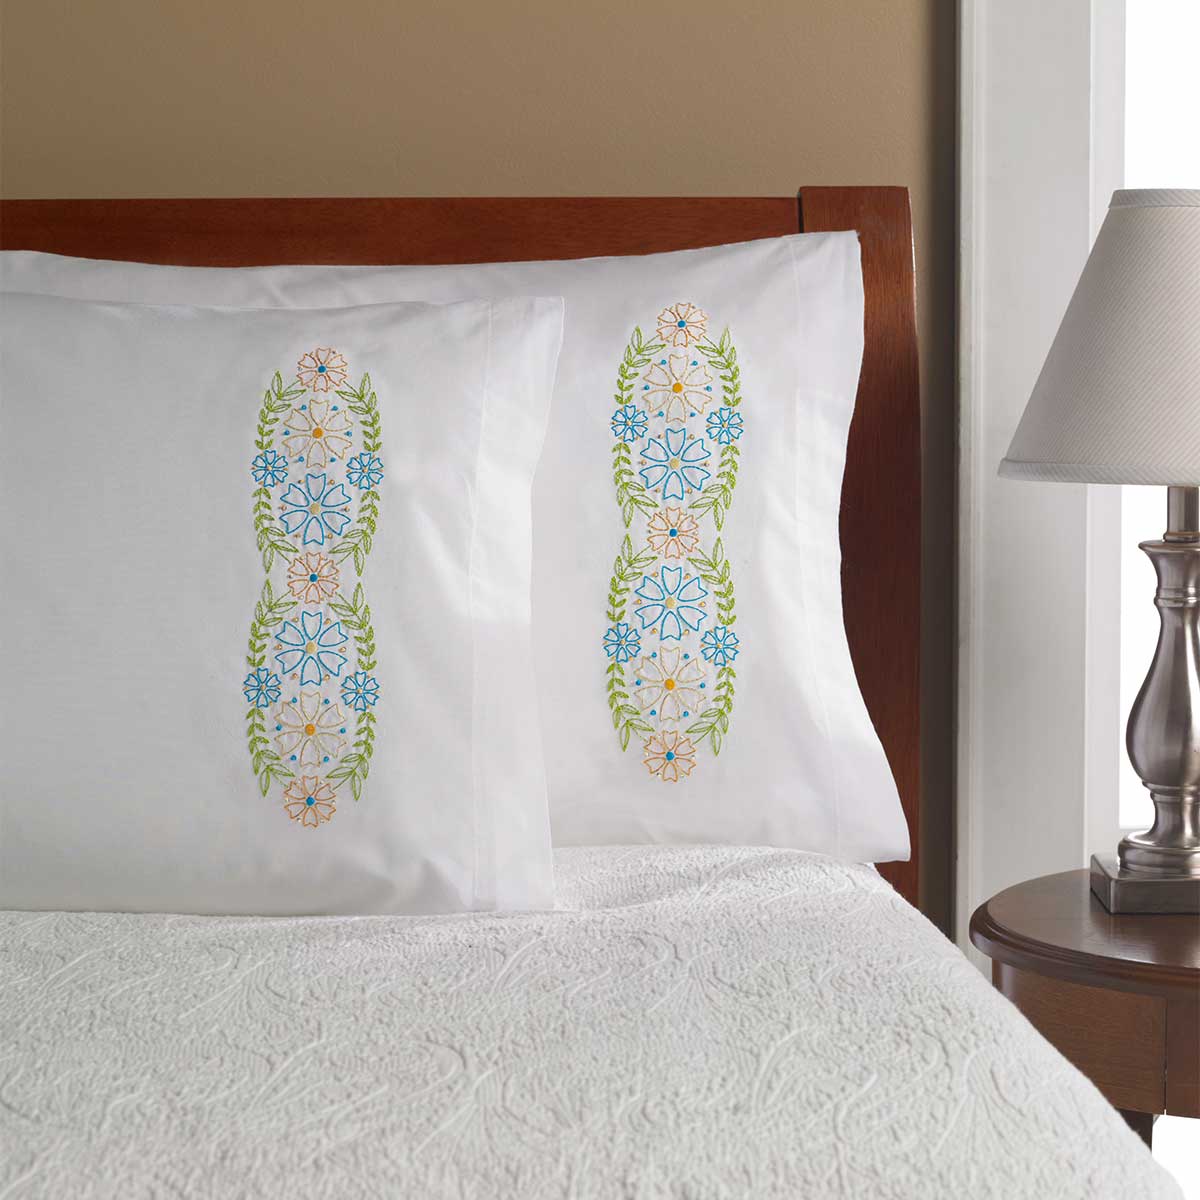 Bucilla ® Stamped Cross Stitch & Embroidery - Pillowcase Pairs - Modern Floral